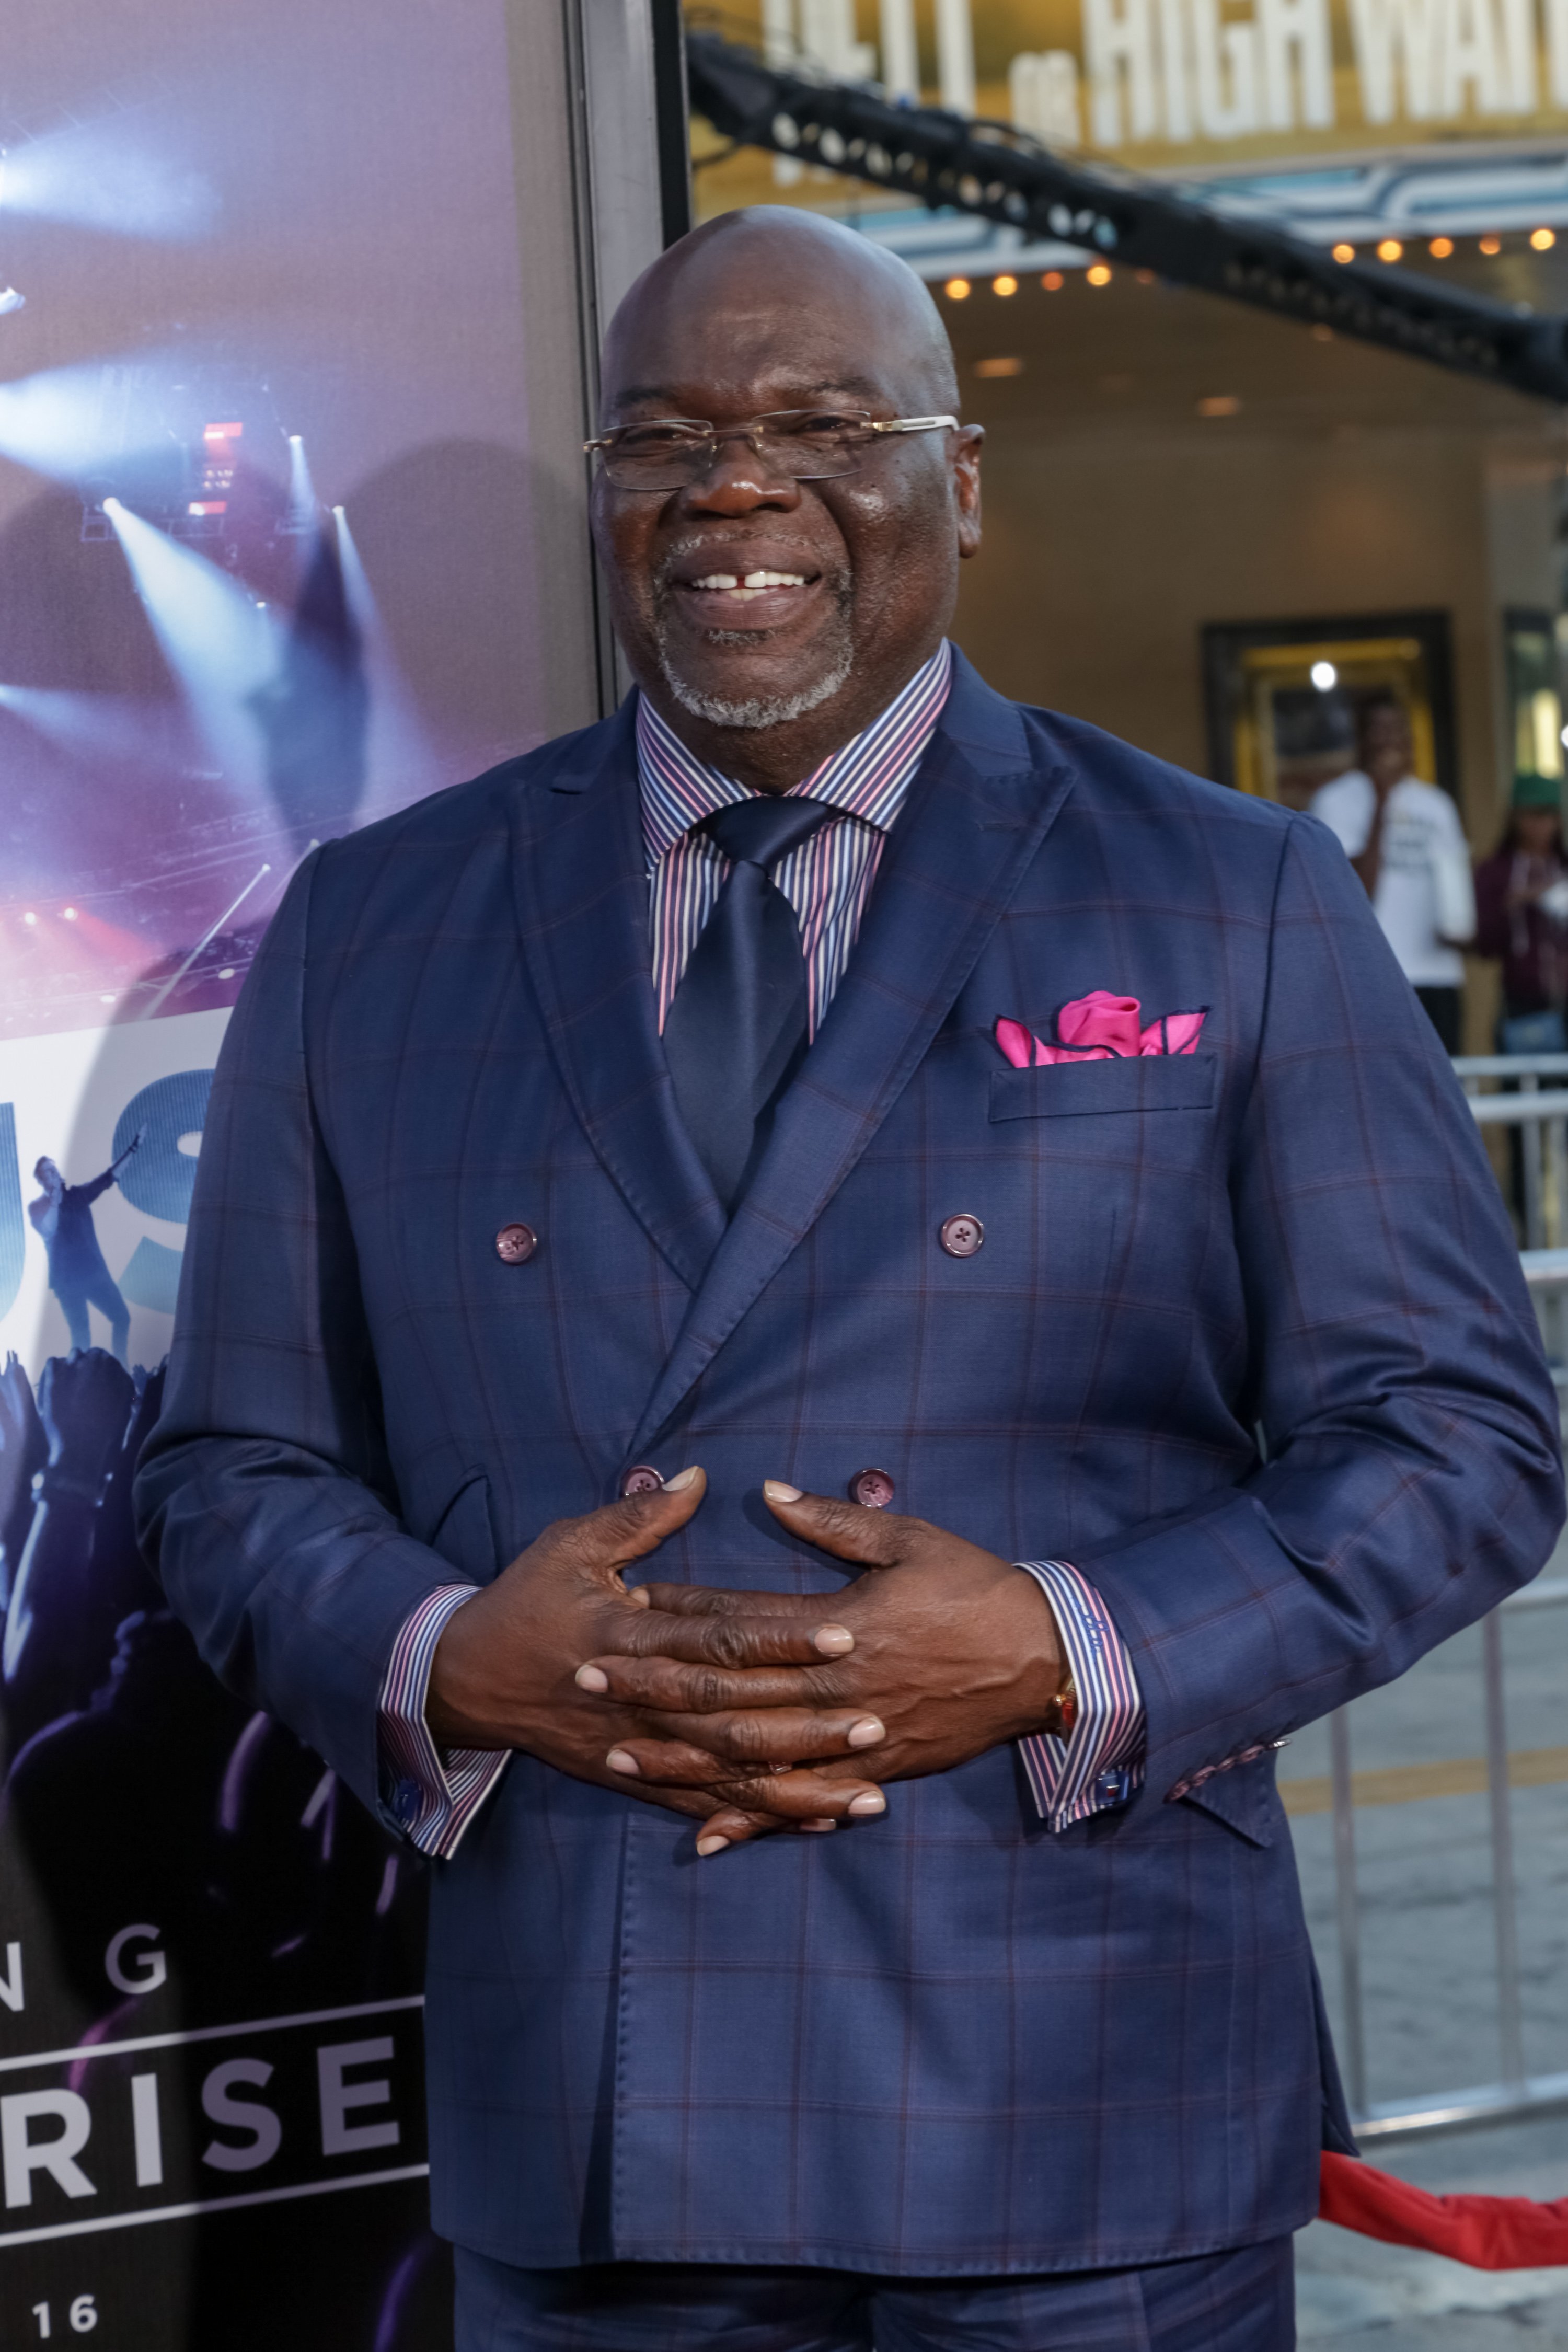 Bishop TD Jakes attends the Premiere Of Pure Flix Entertainment's "Hillsong: Let Hope Rise" at the Mann Village Theatre on September 13, 2016 in Westwood, California. | Photo: Getty Images